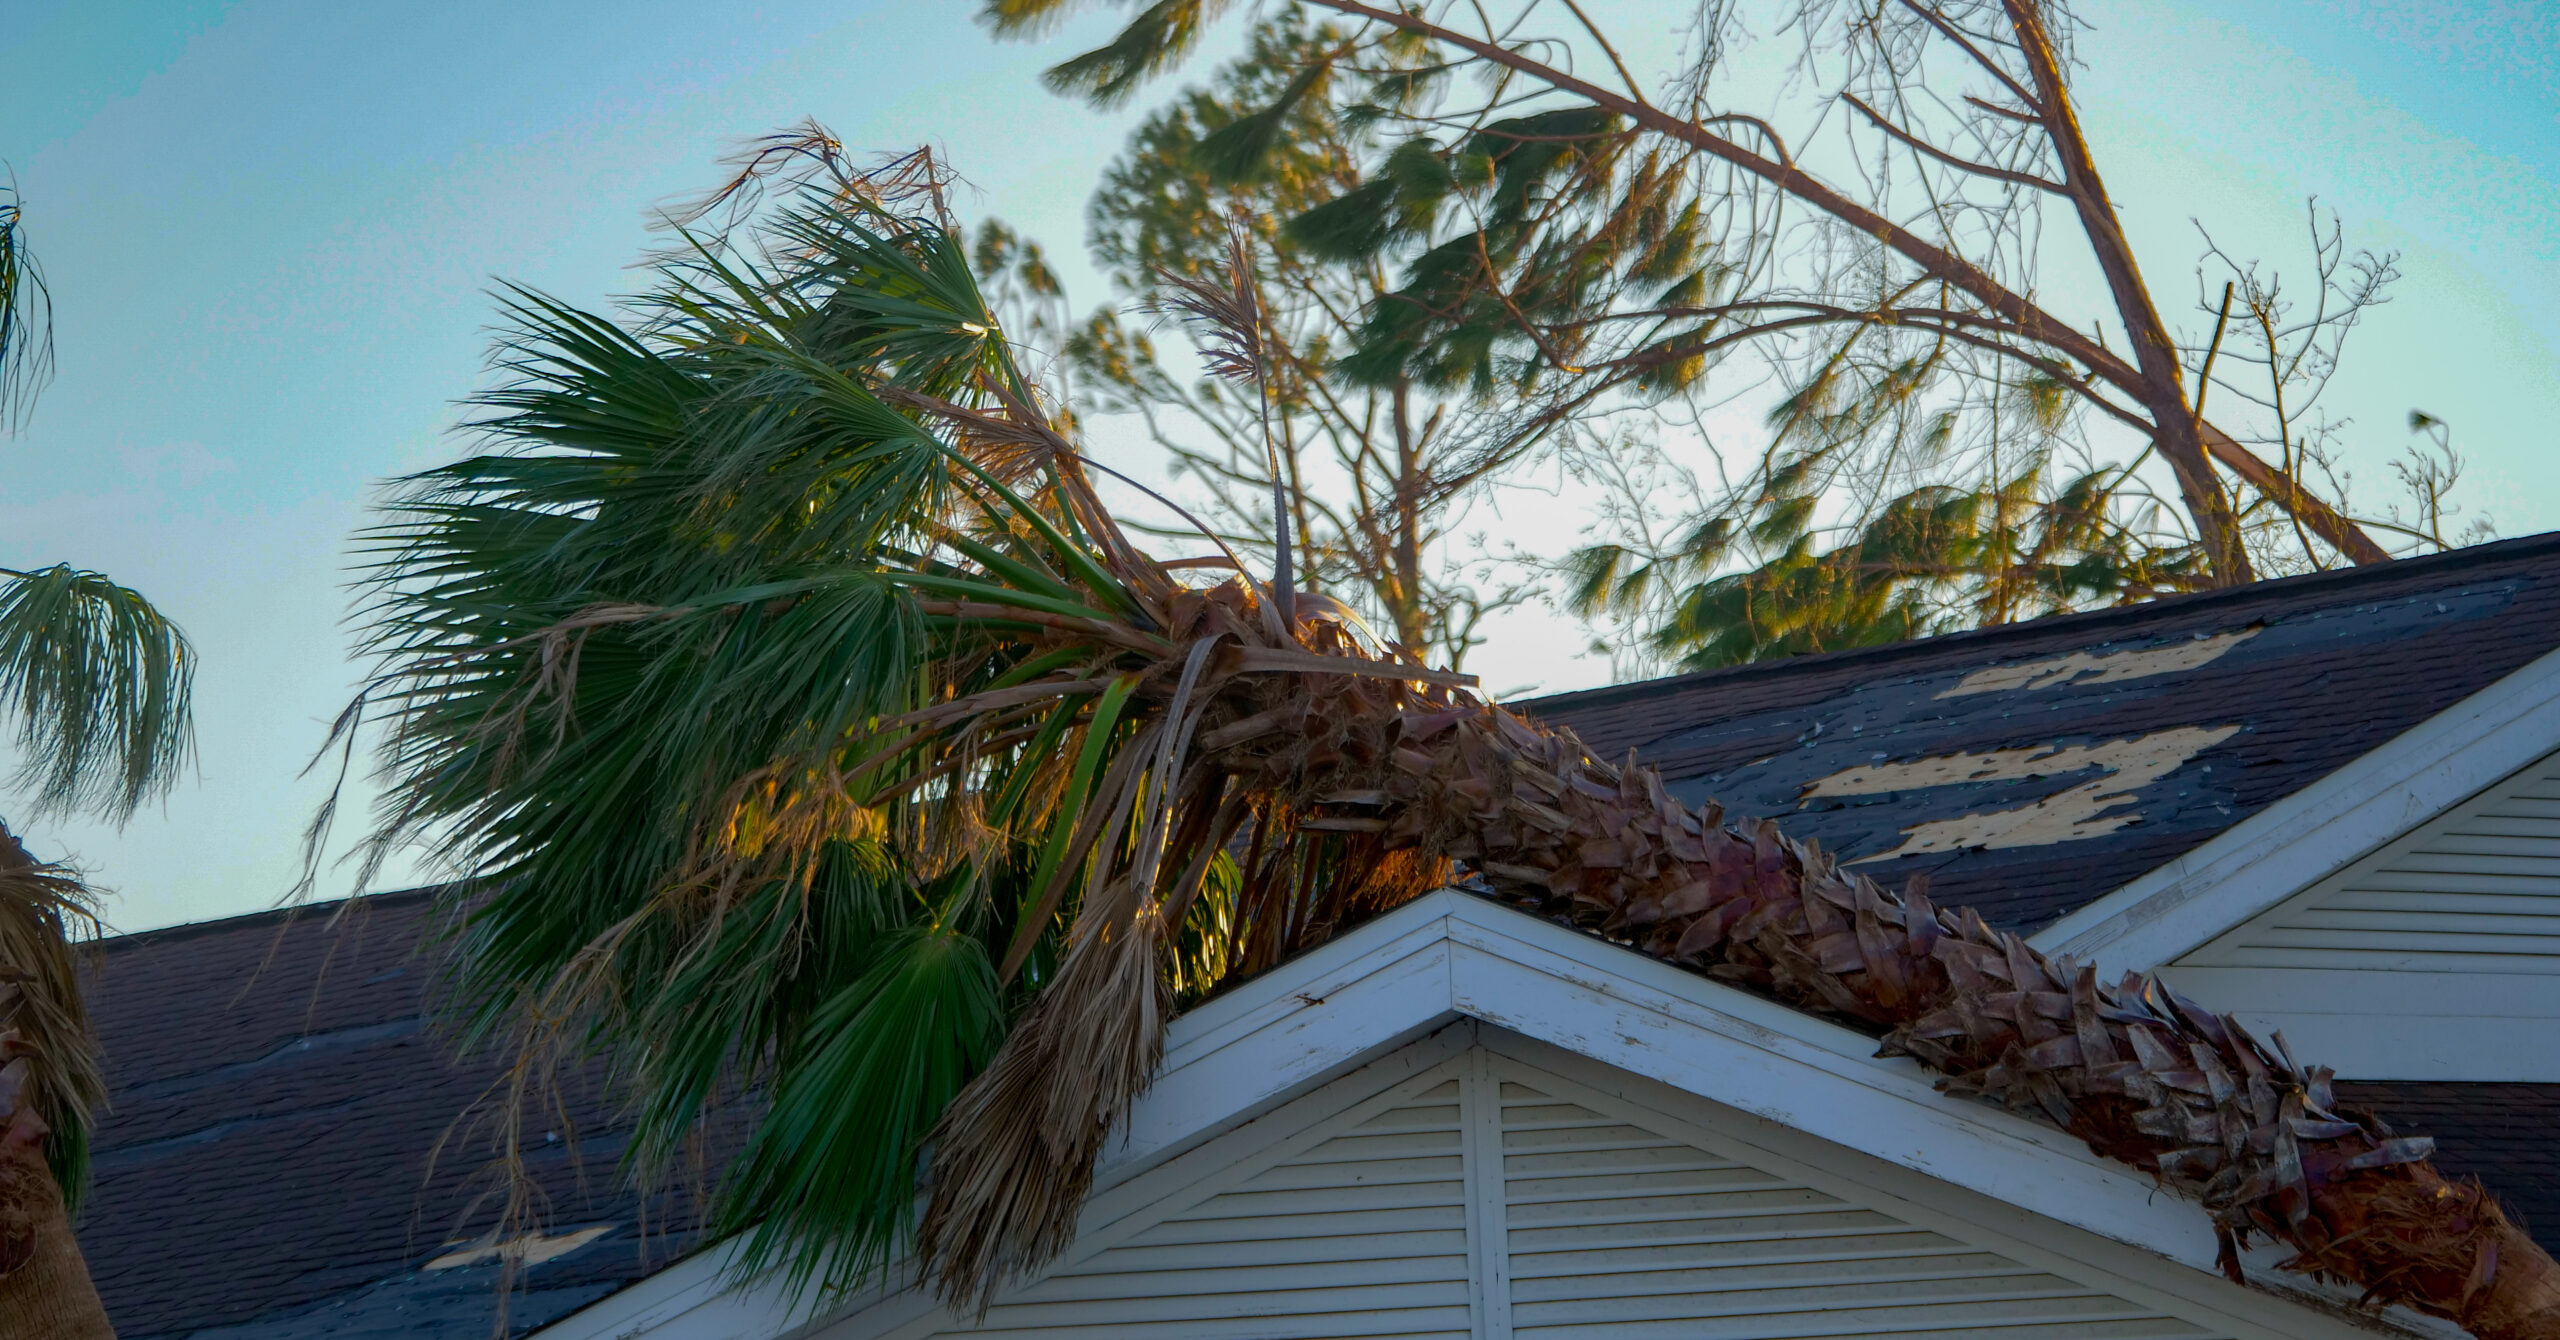 fallen palm tree on the roof of a house